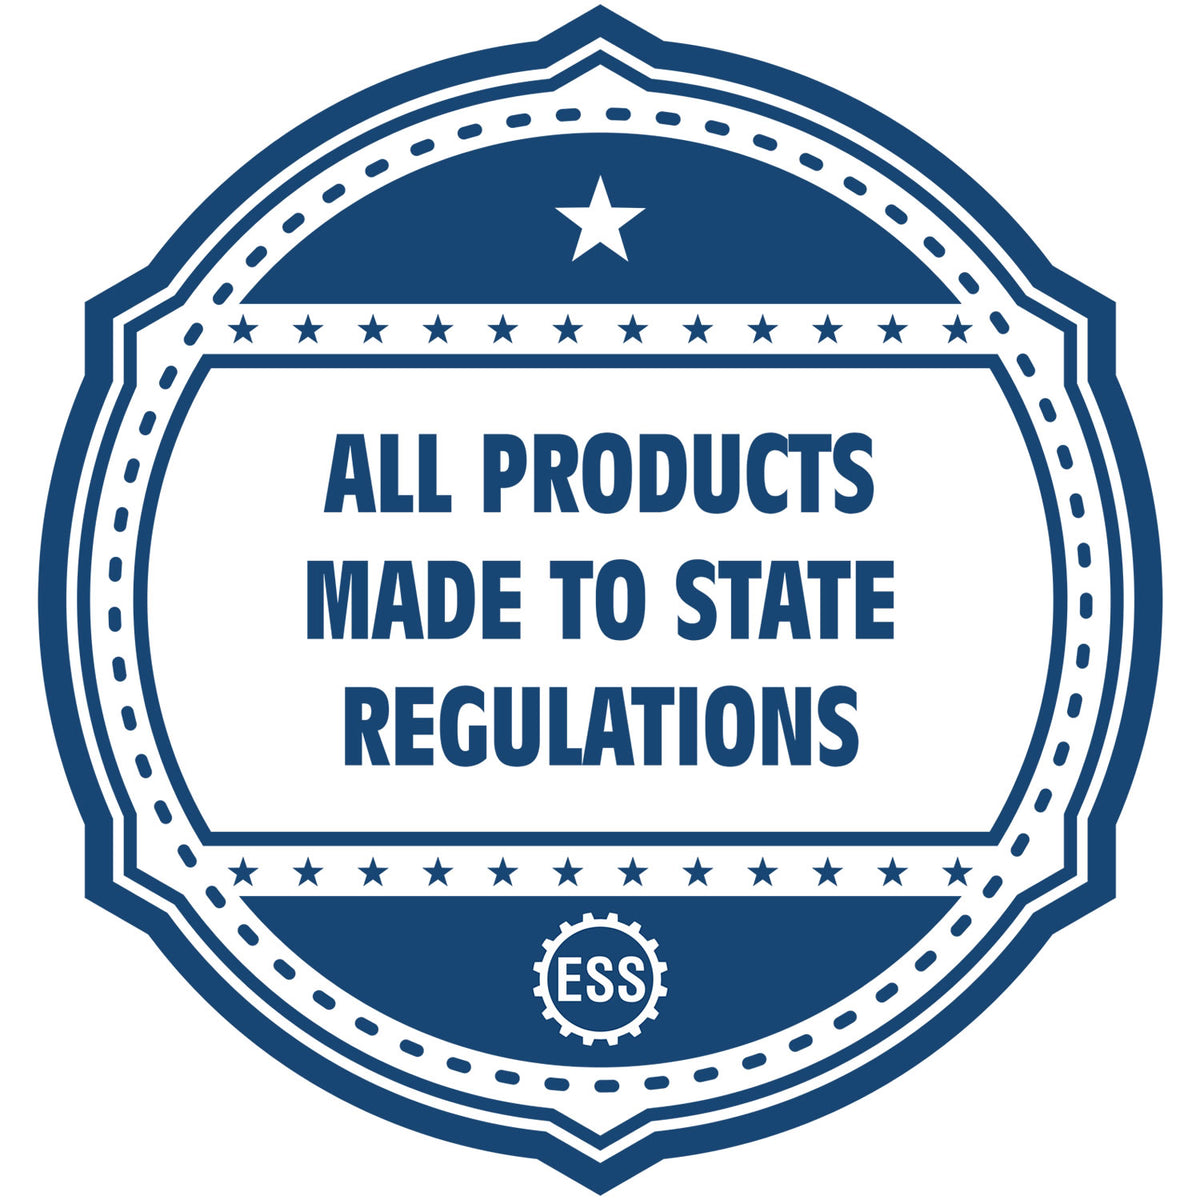 An icon or badge element for the State of Guam Soft Land Surveyor Embossing Seal showing that this product is made in compliance with state regulations.